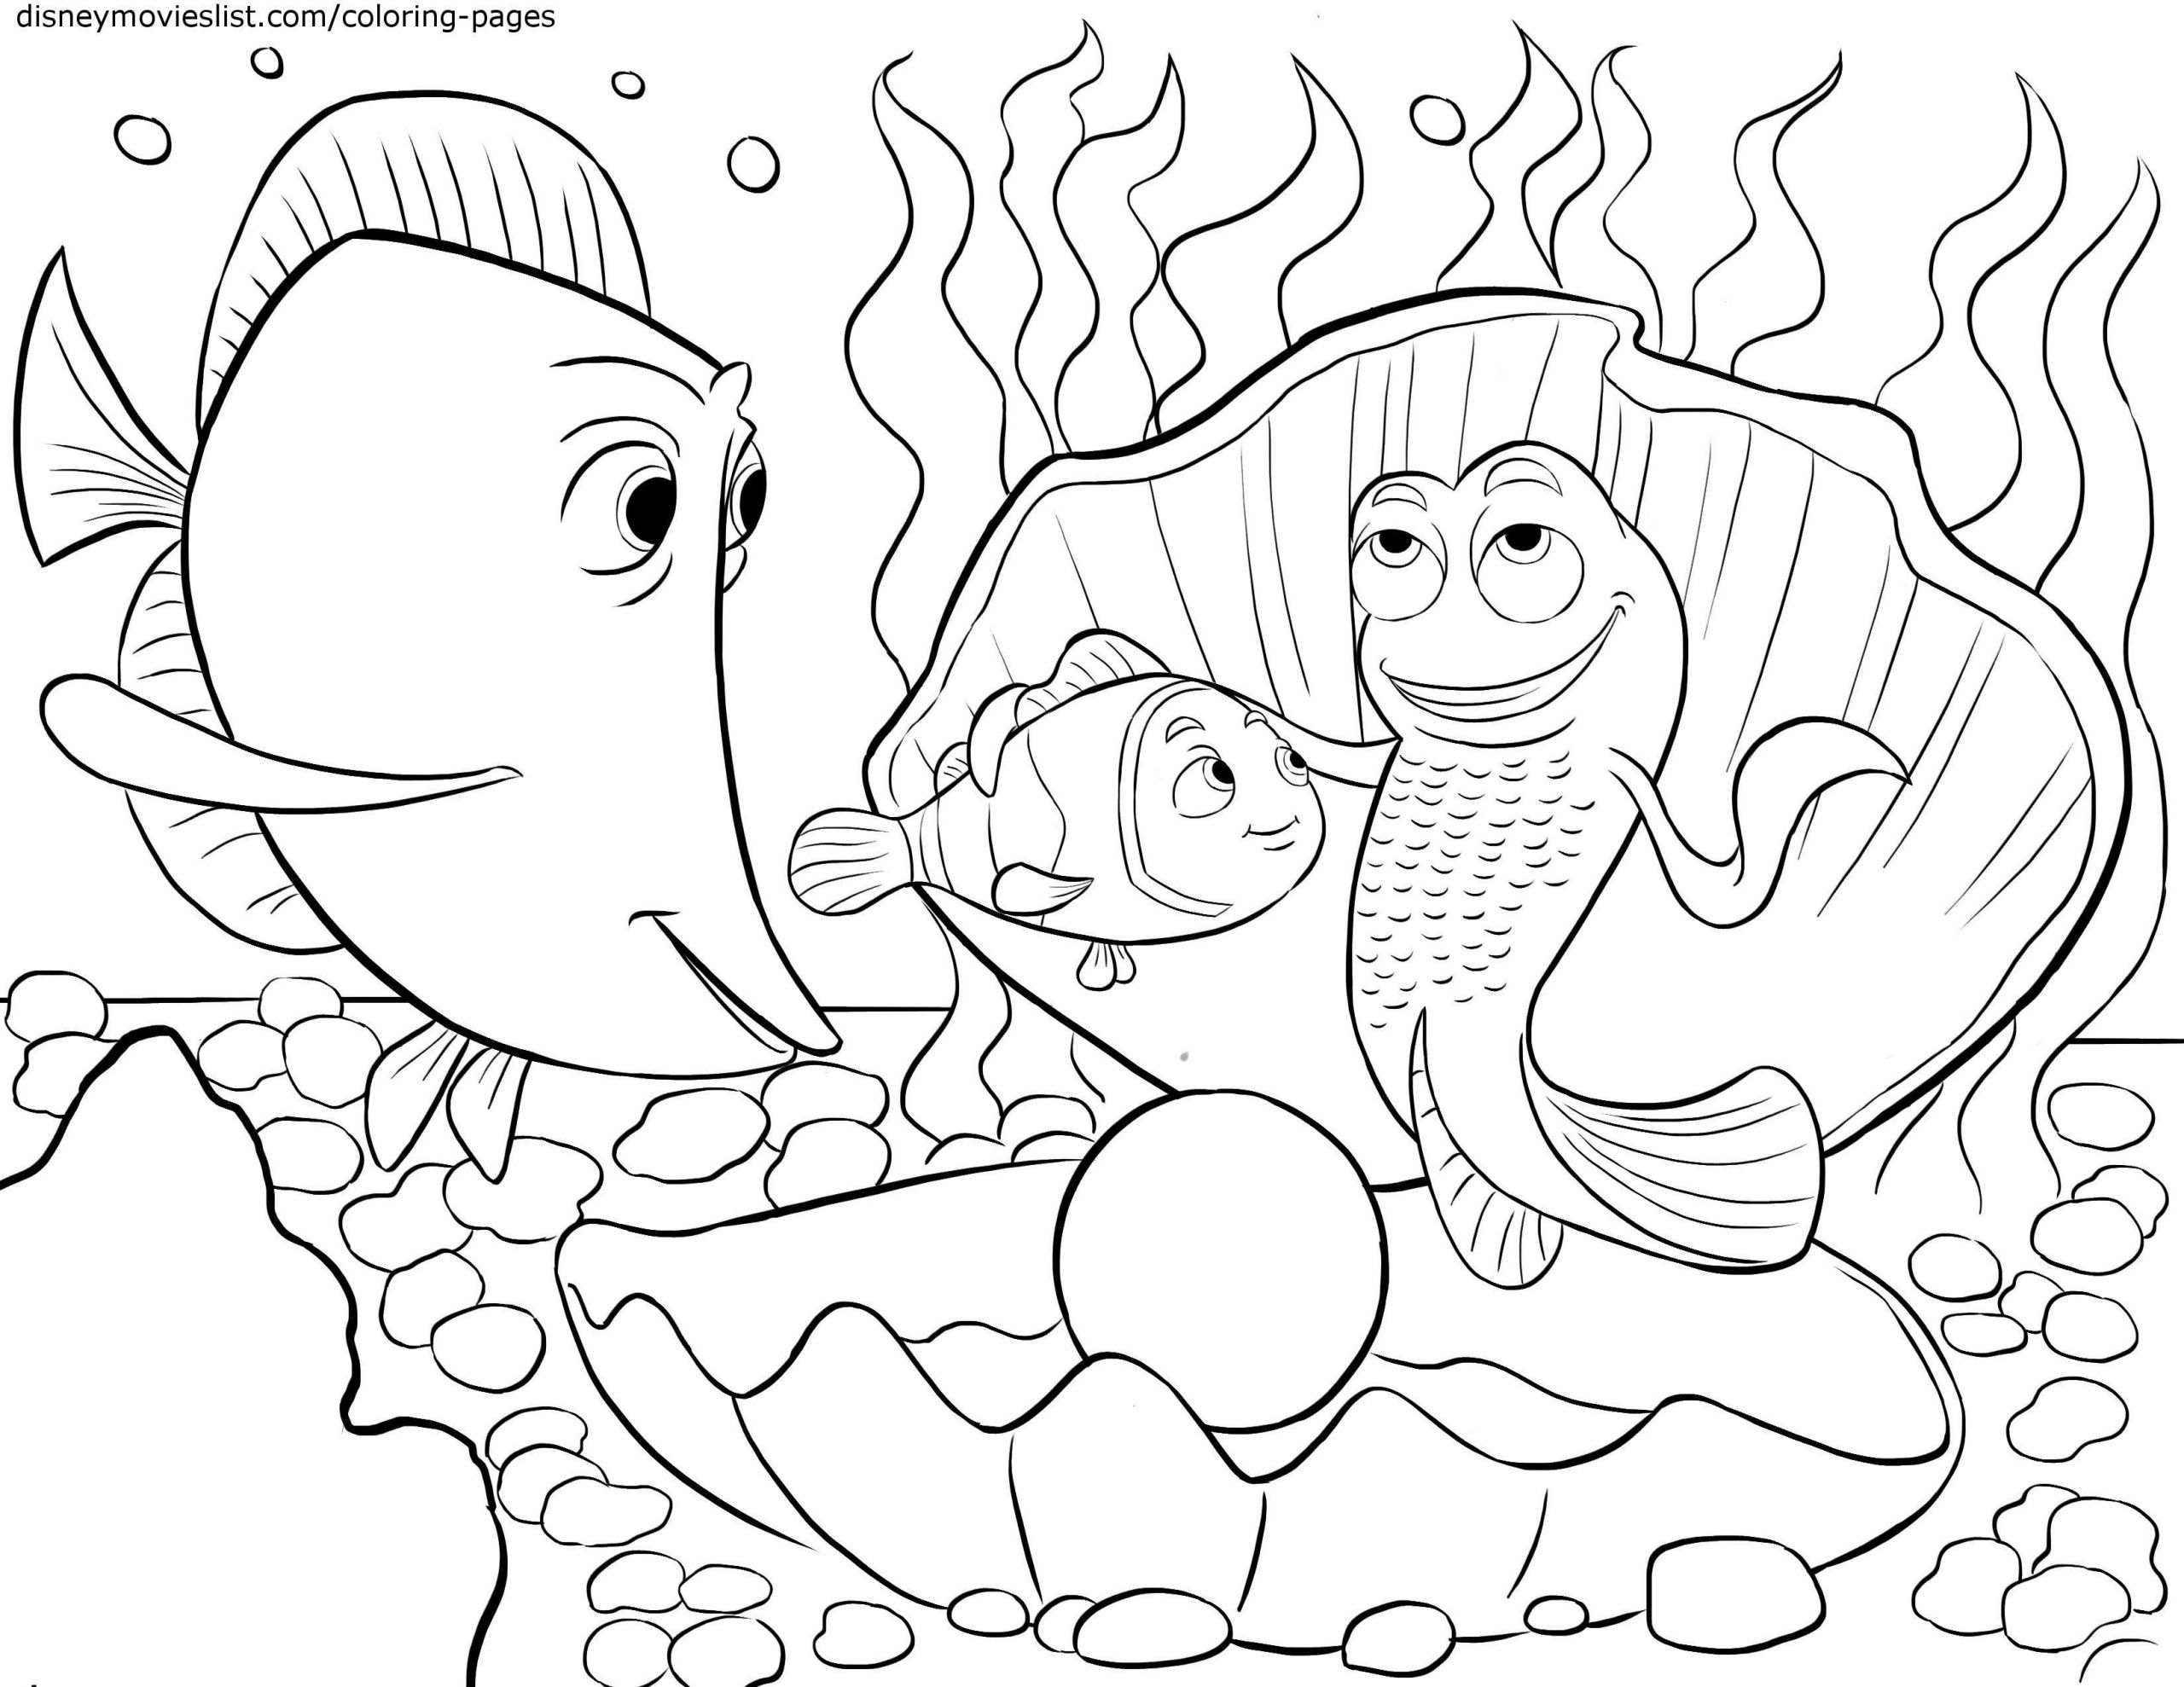 Printable Coloring Pages For Kids.Pdf
 Coloring Pages Marvellous Coloring Pages For Kids Pdf